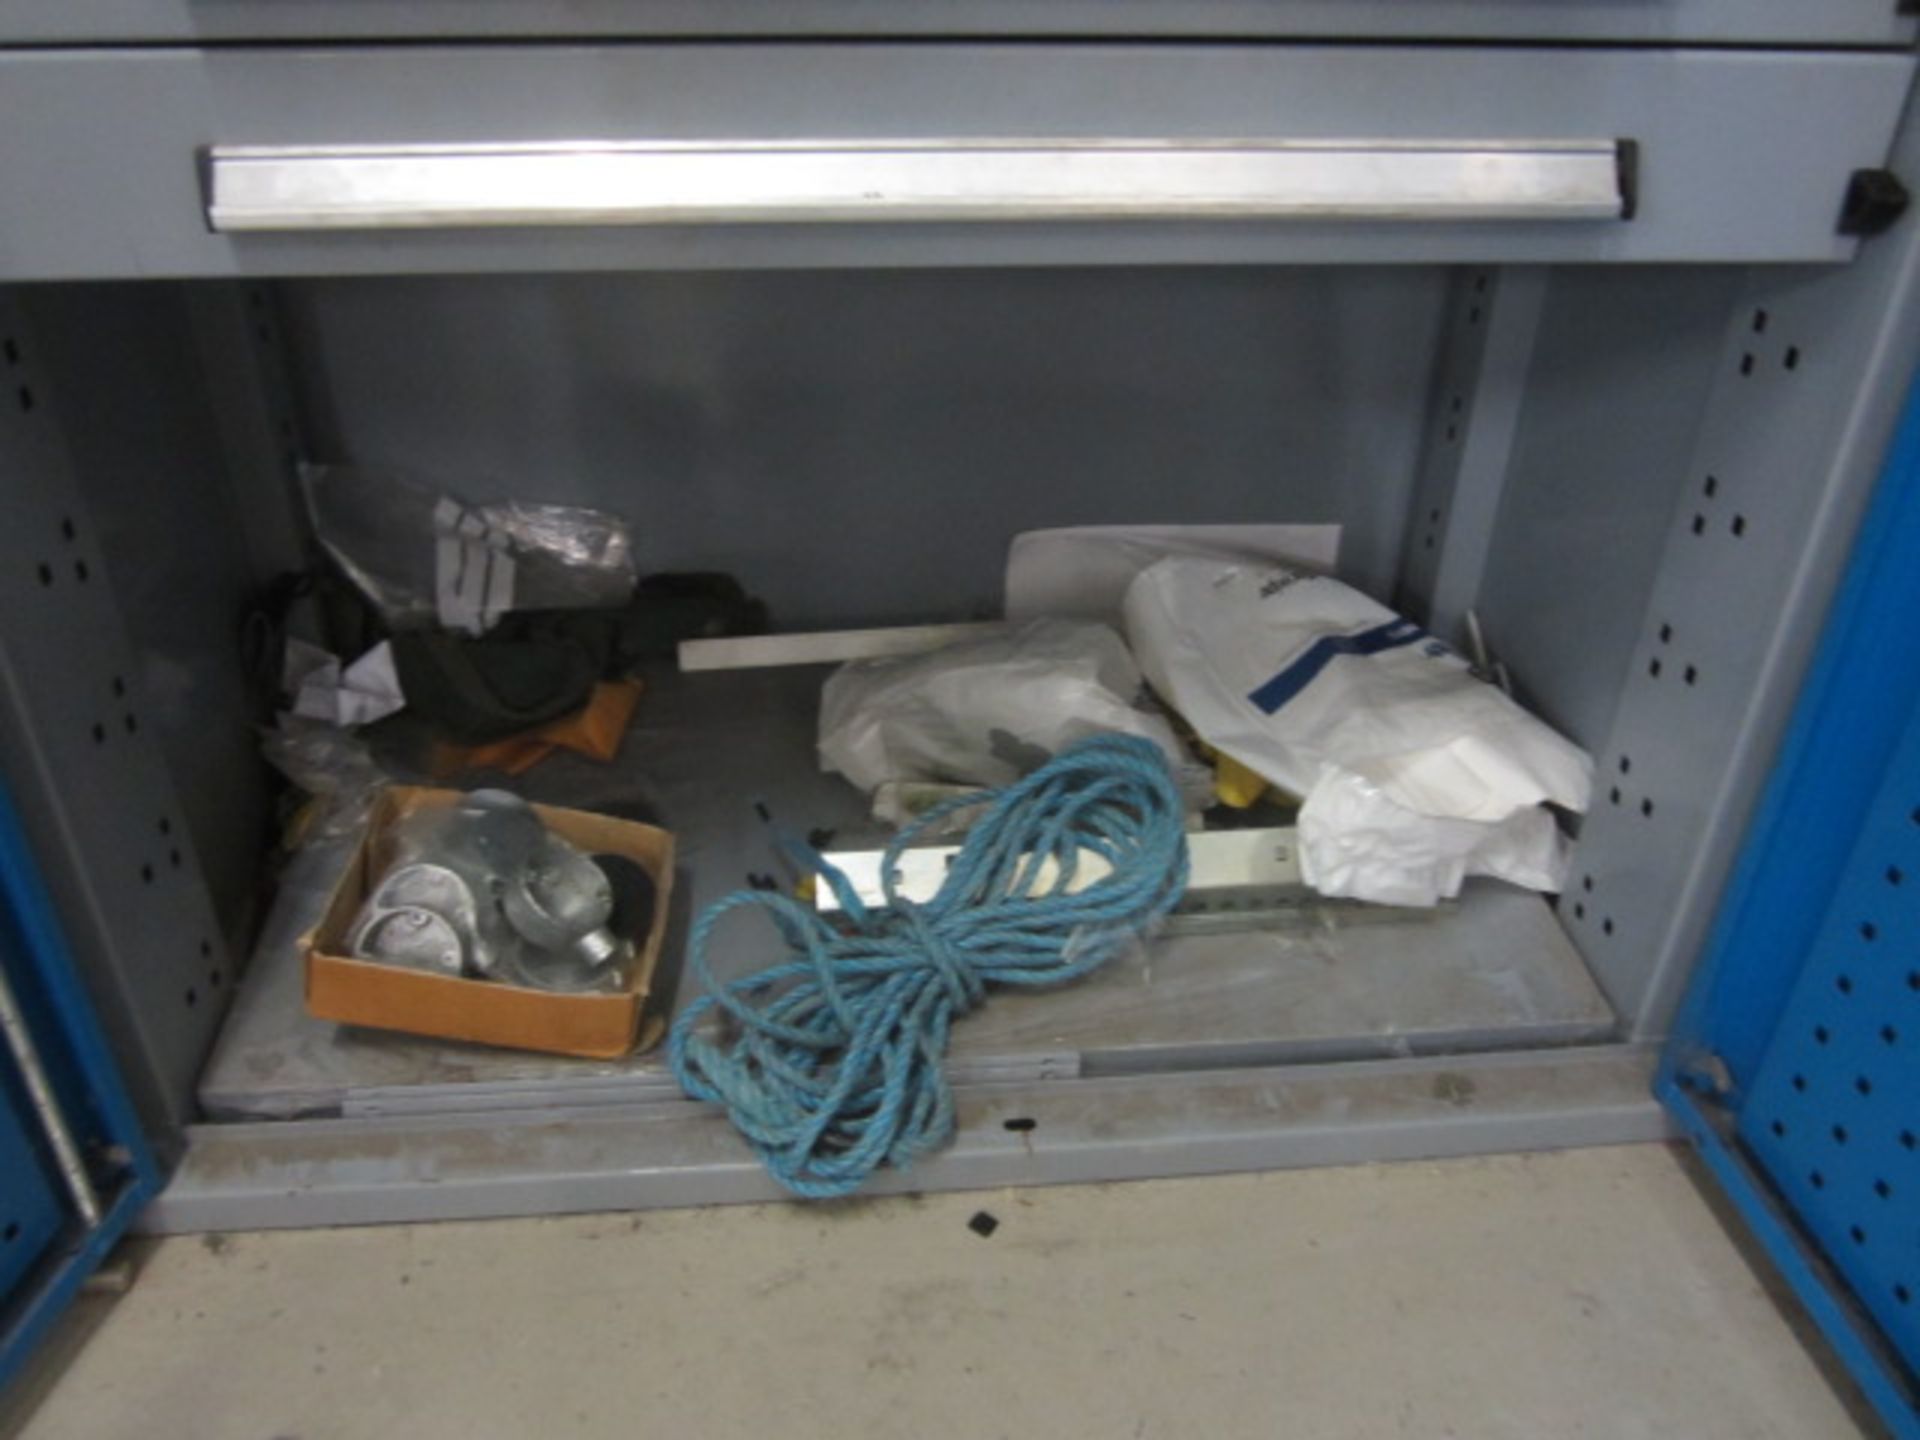 Bott compact steel 2 door/4 drawer cabinet with contents including pipe fittings, mallets, various - Image 8 of 9